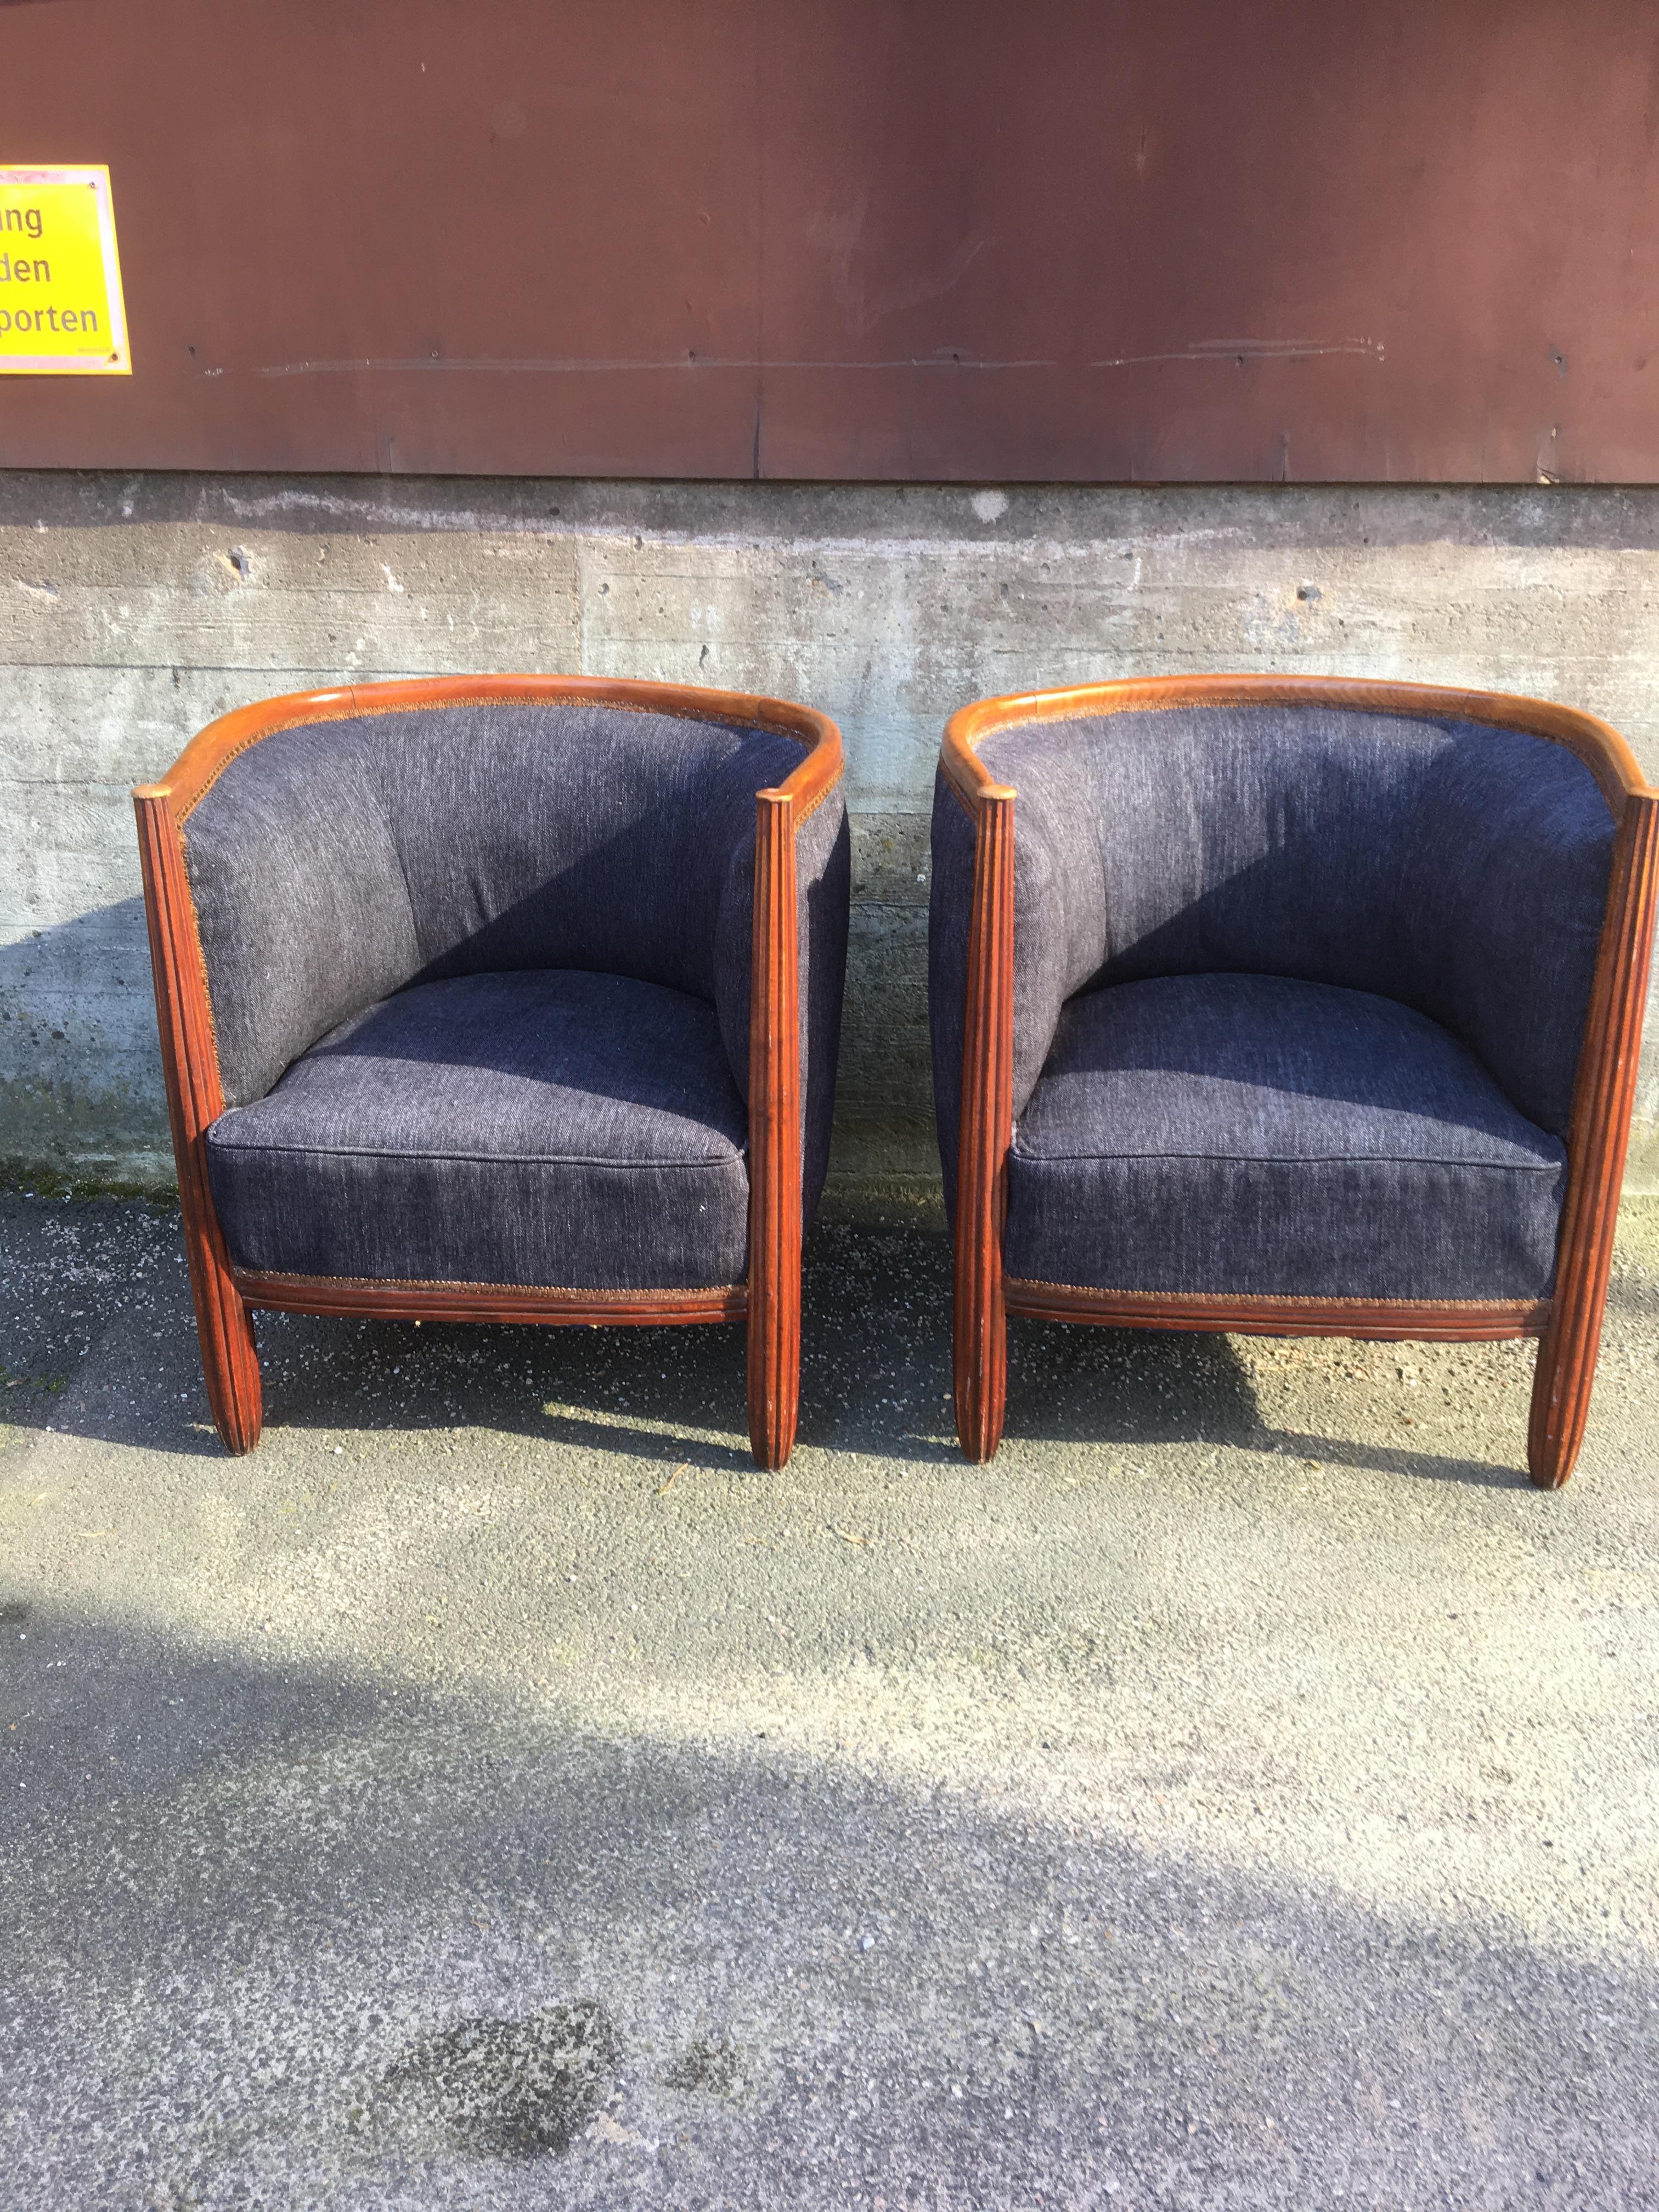 Cotton Pair of French Art Deco Barrel Club Chairs.